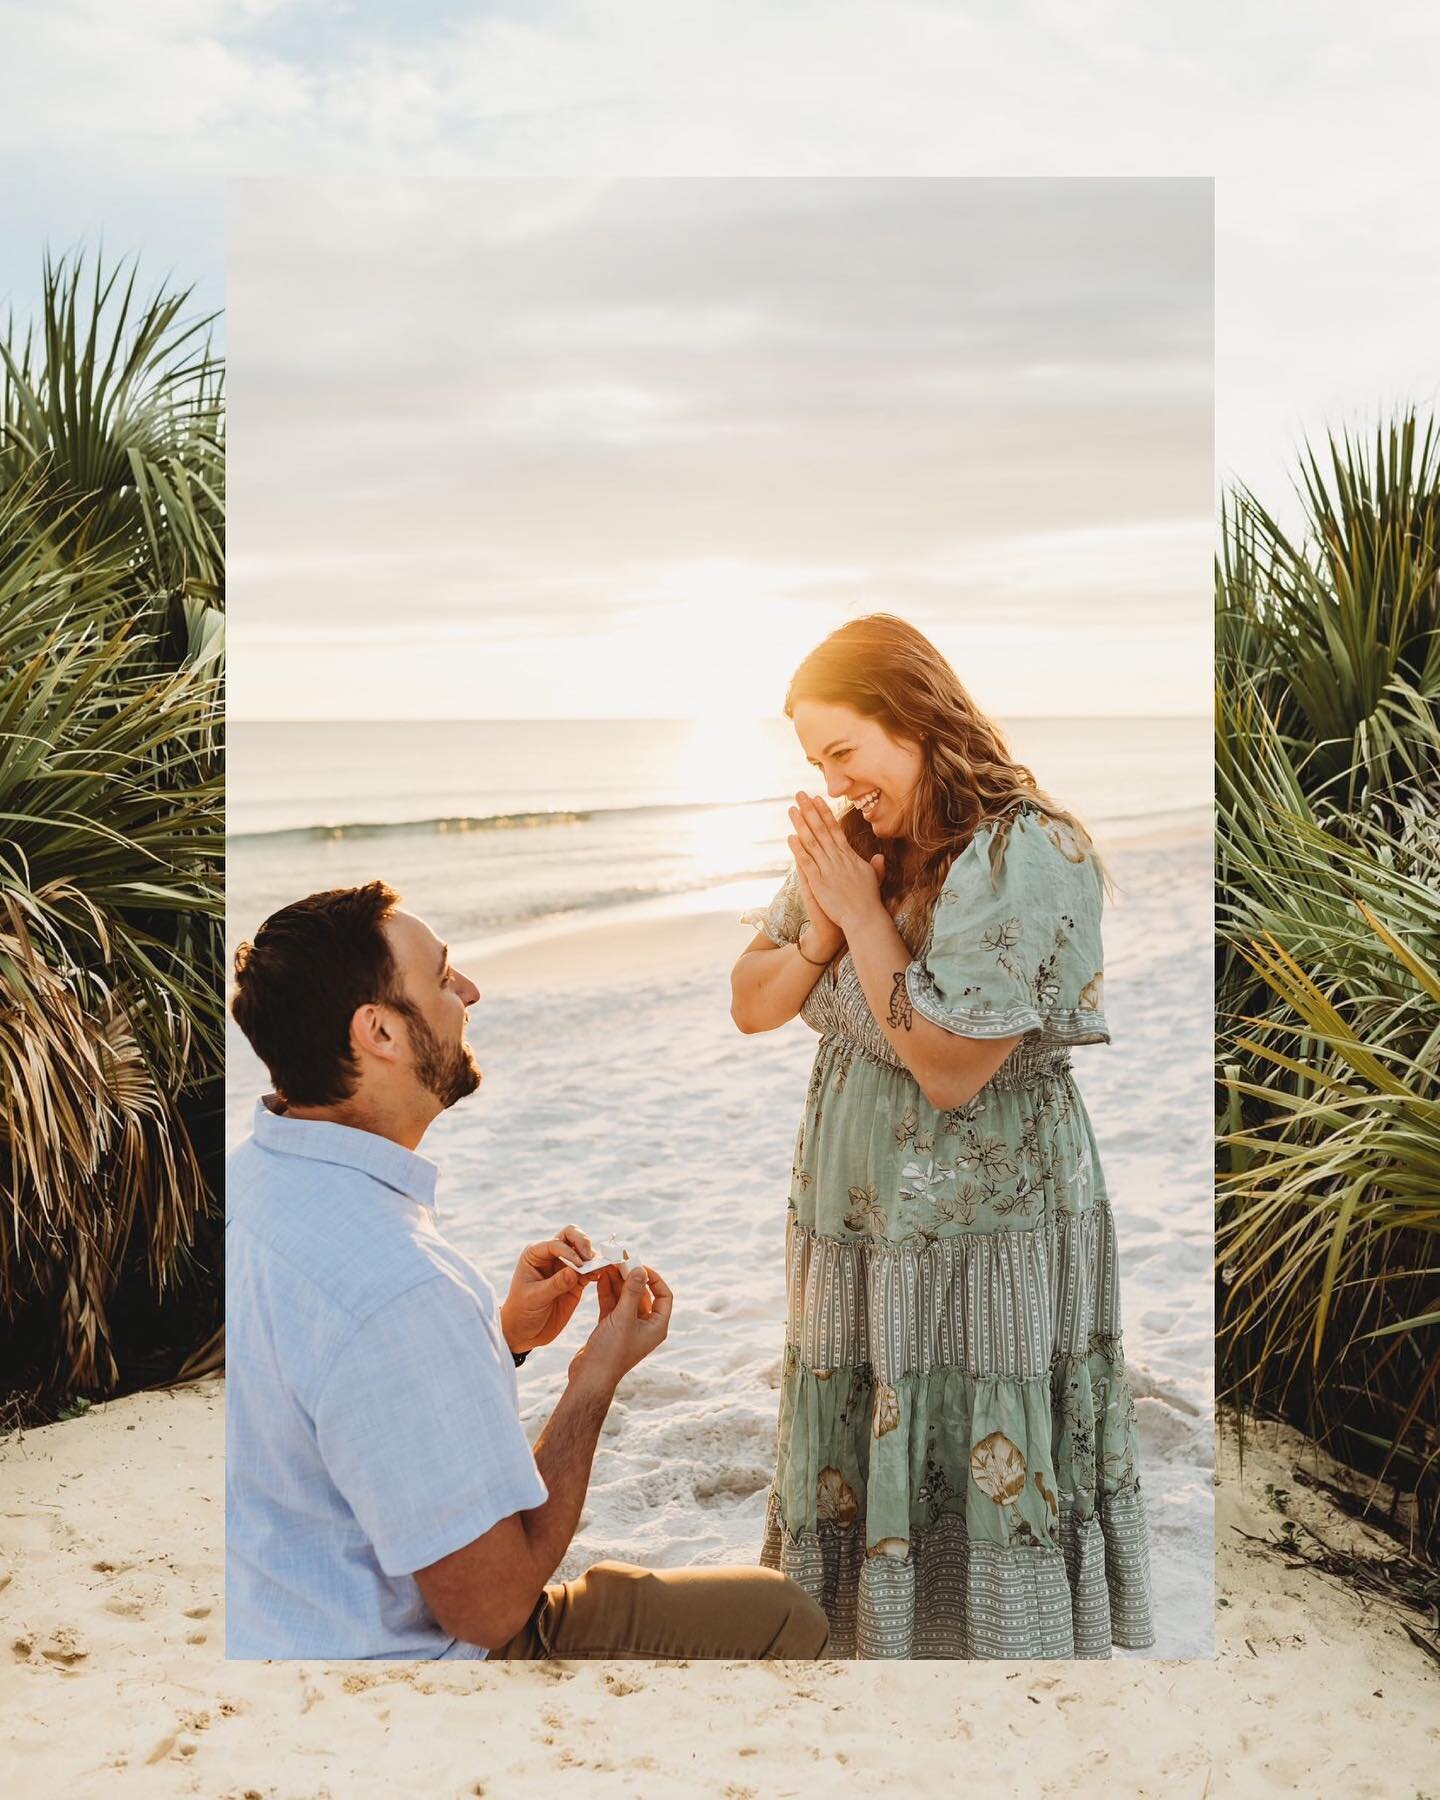 When your family session turns into a proposal 😍😍😍 

I just get so excited when my past clients have me capture the special milestones in their lives. Our journey together started when I photographed the birth of their sweet girl, so when Scott re